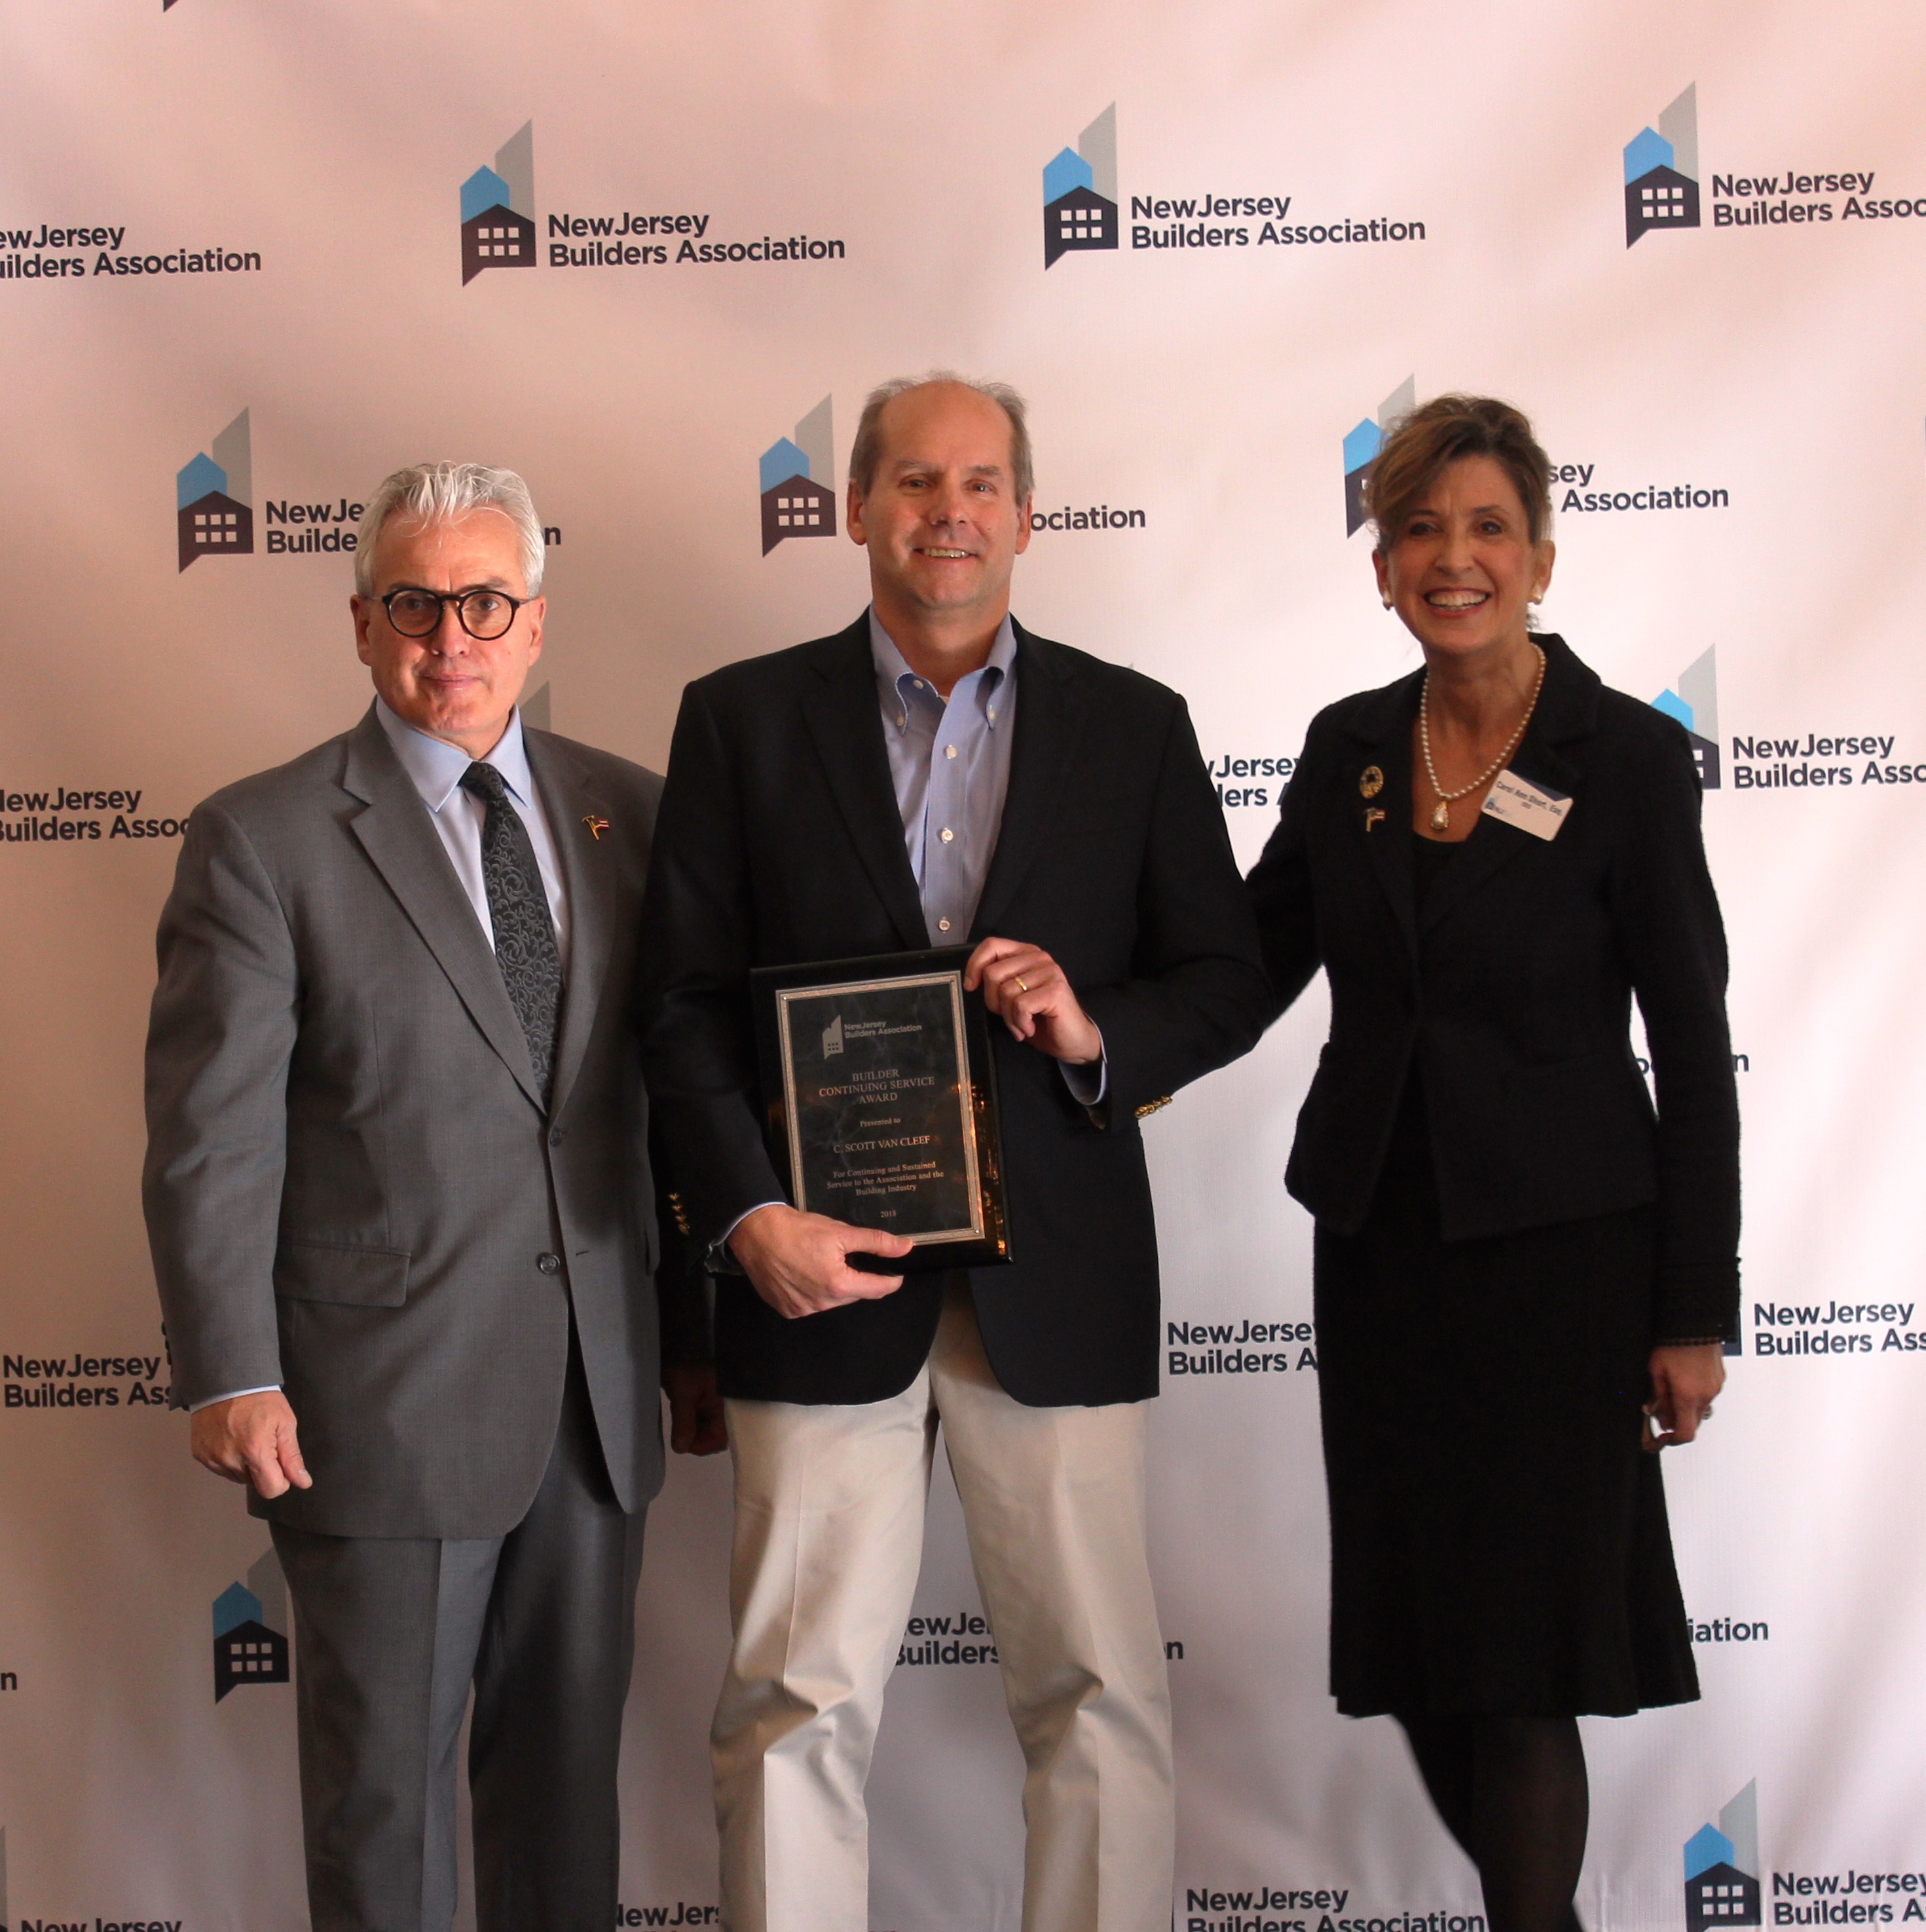 Scott Van Cleef honored with NJBA’s 2018 Builder Continuing Service Award